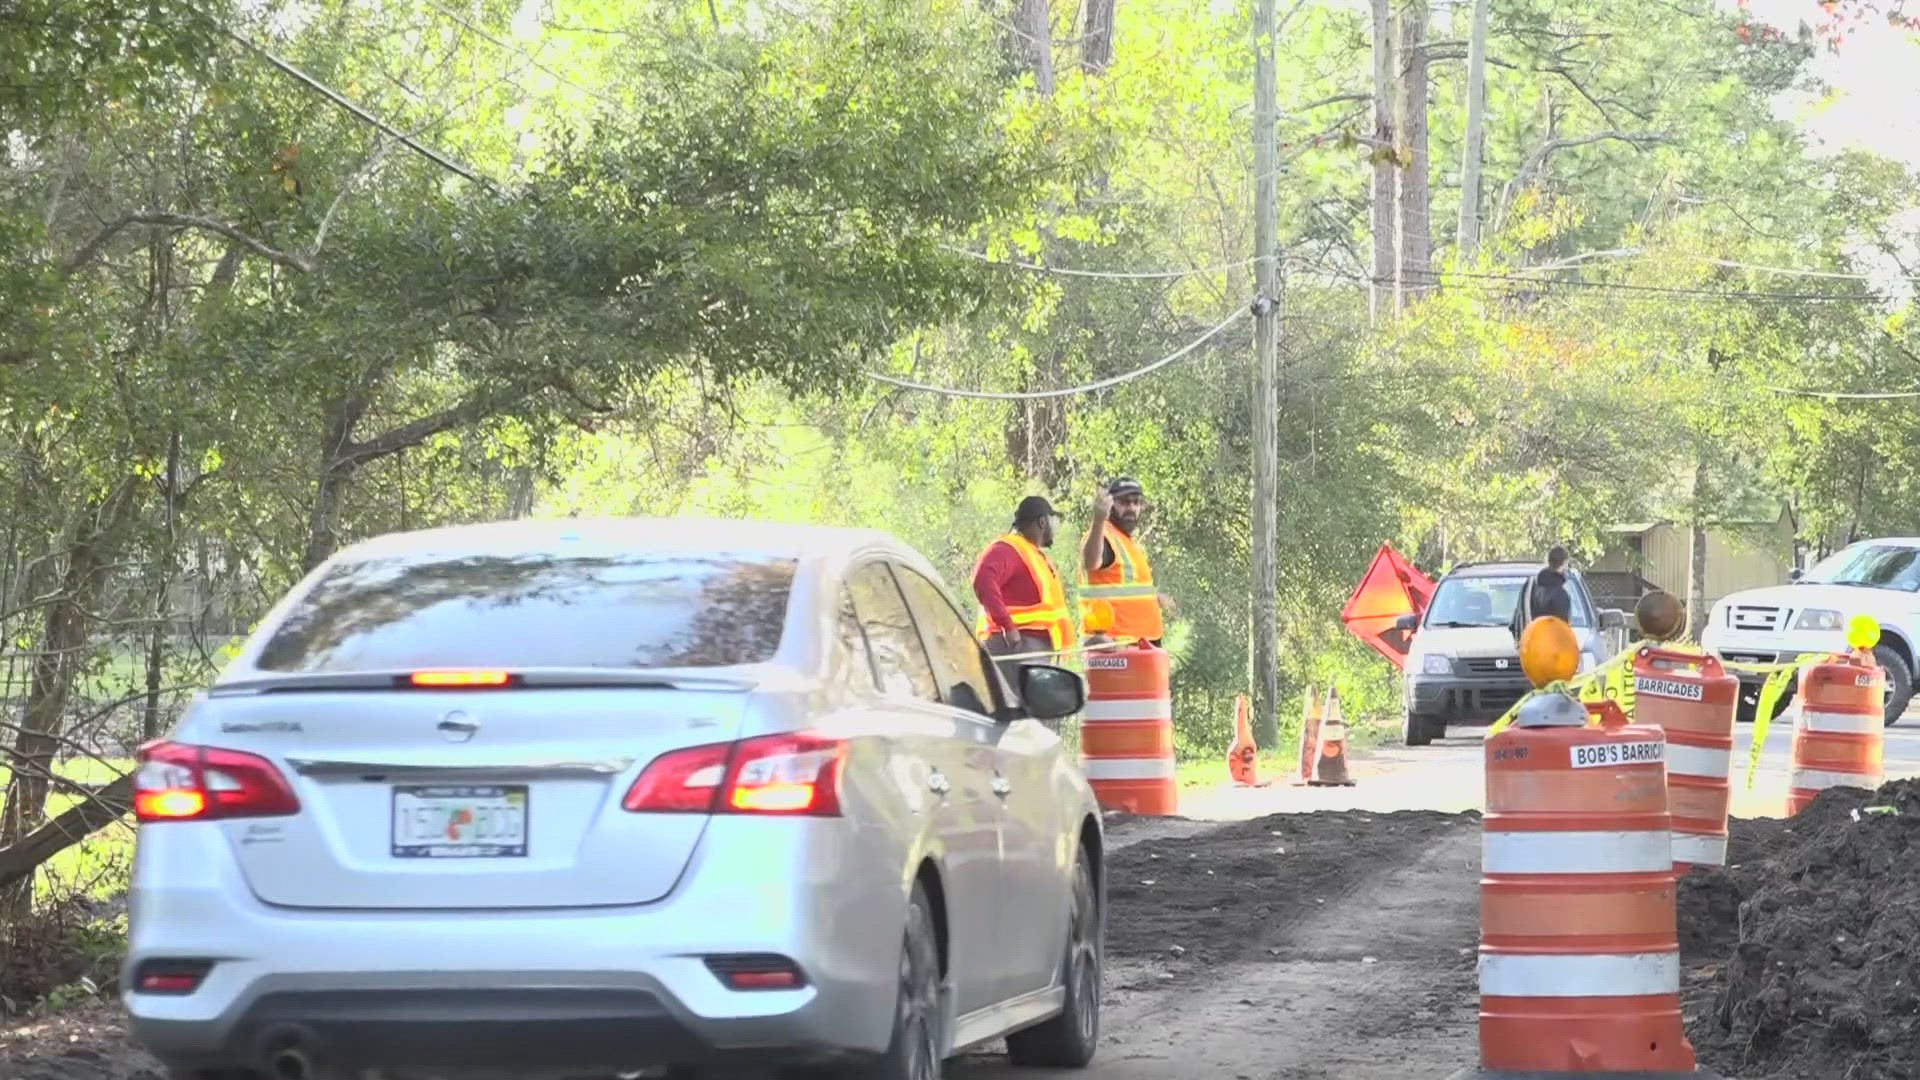 A project manager told First Coast News that it could take months to give the road a permanent fix, while the city contracts a project to build a solid solution.